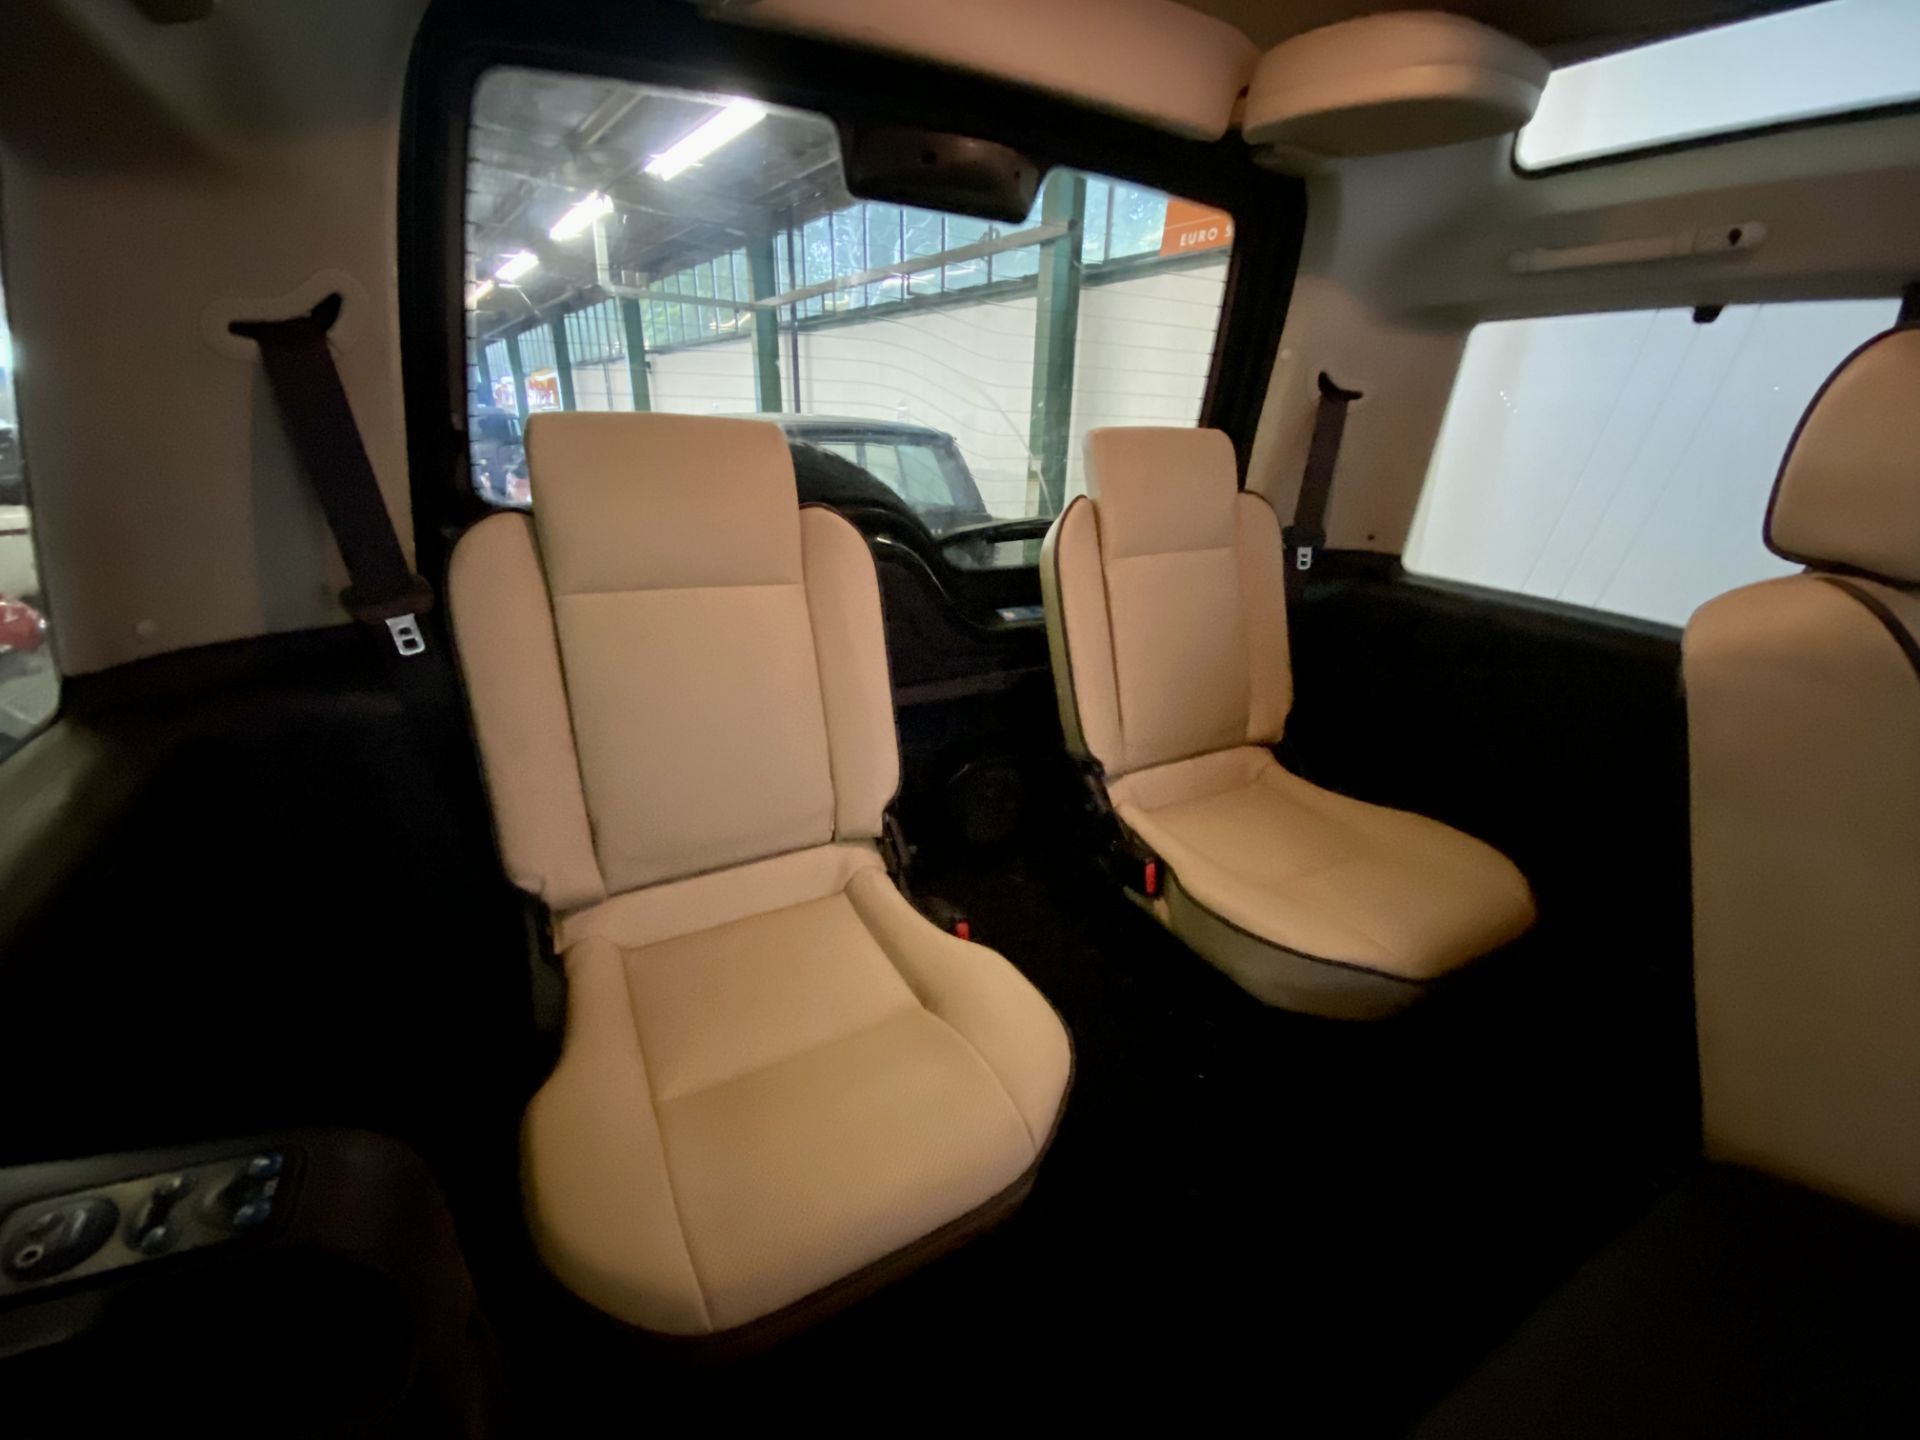 Land Rover Discovery ES TD5 - Image 26 of 32